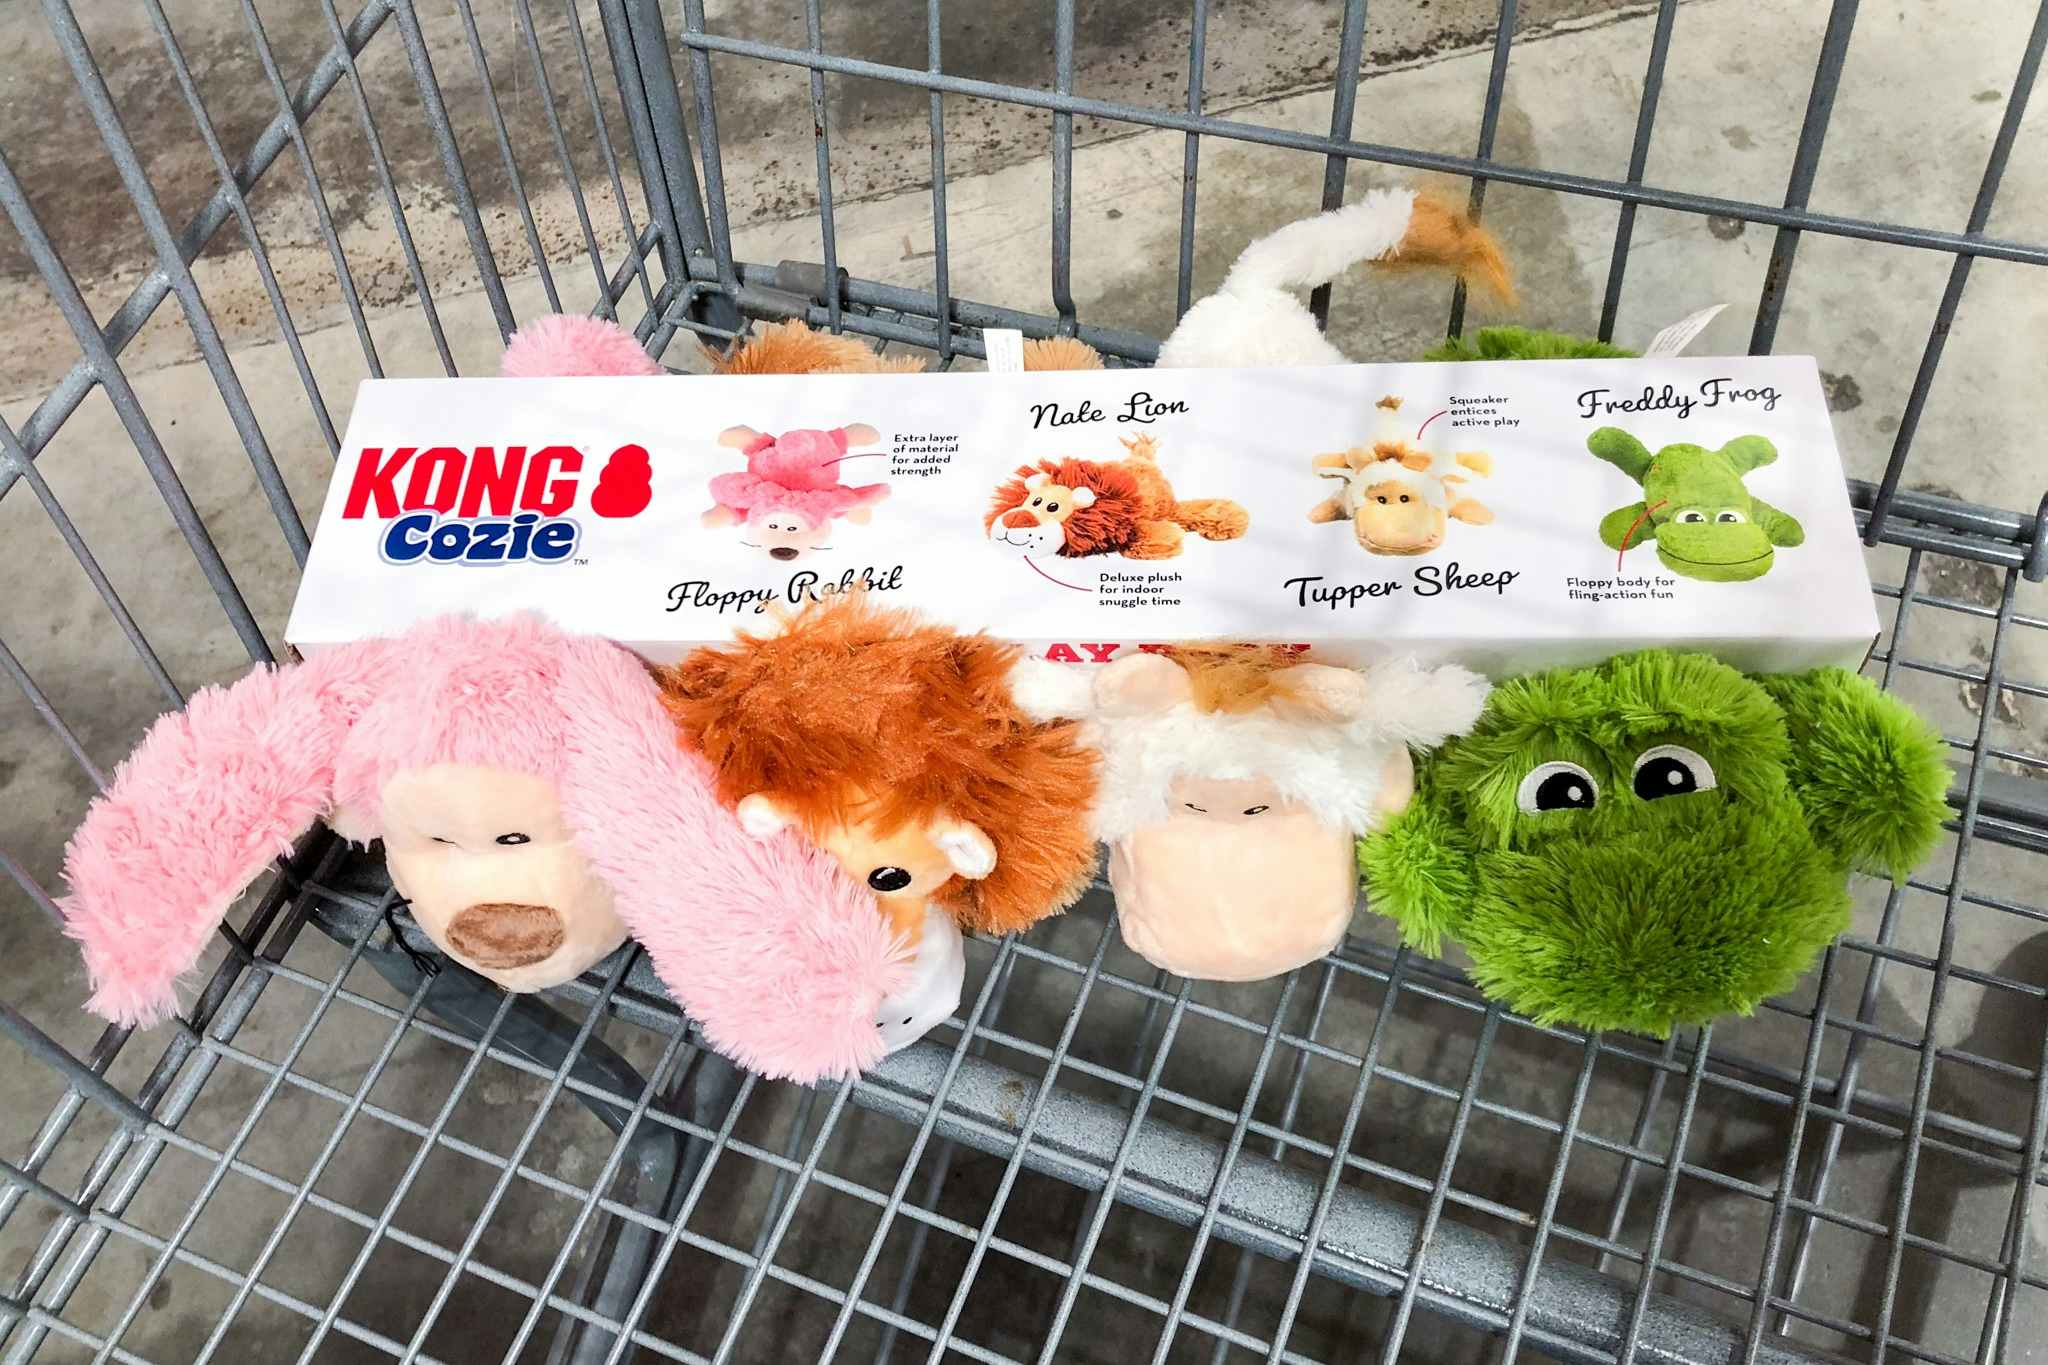 Kong Cozies Dog Toys 4-Pack, Only $11.99 at Costco (Reg. $16.99)